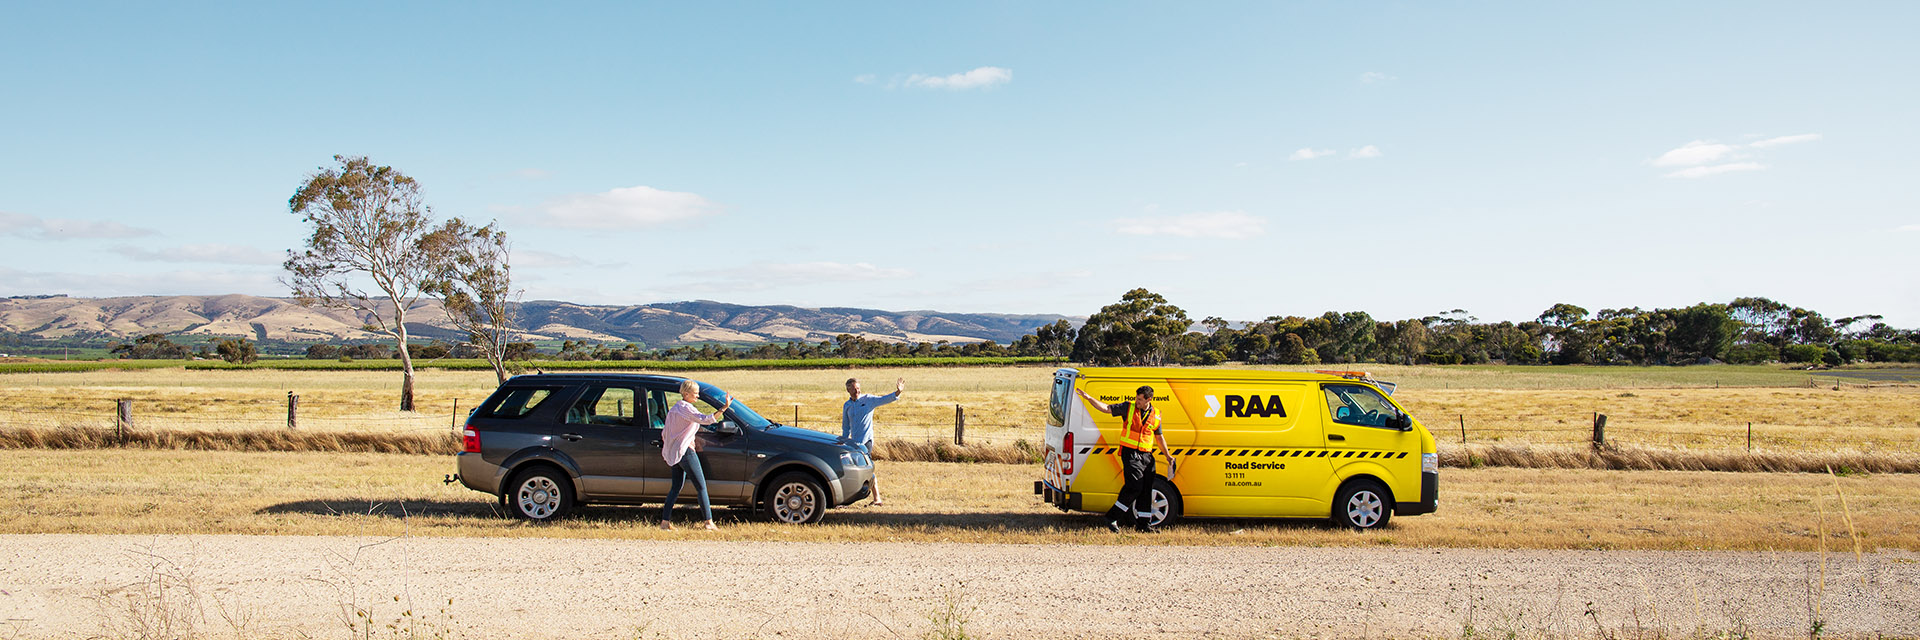 An RAA Road Service patrol van helping people with a car stopped on the side of the road.